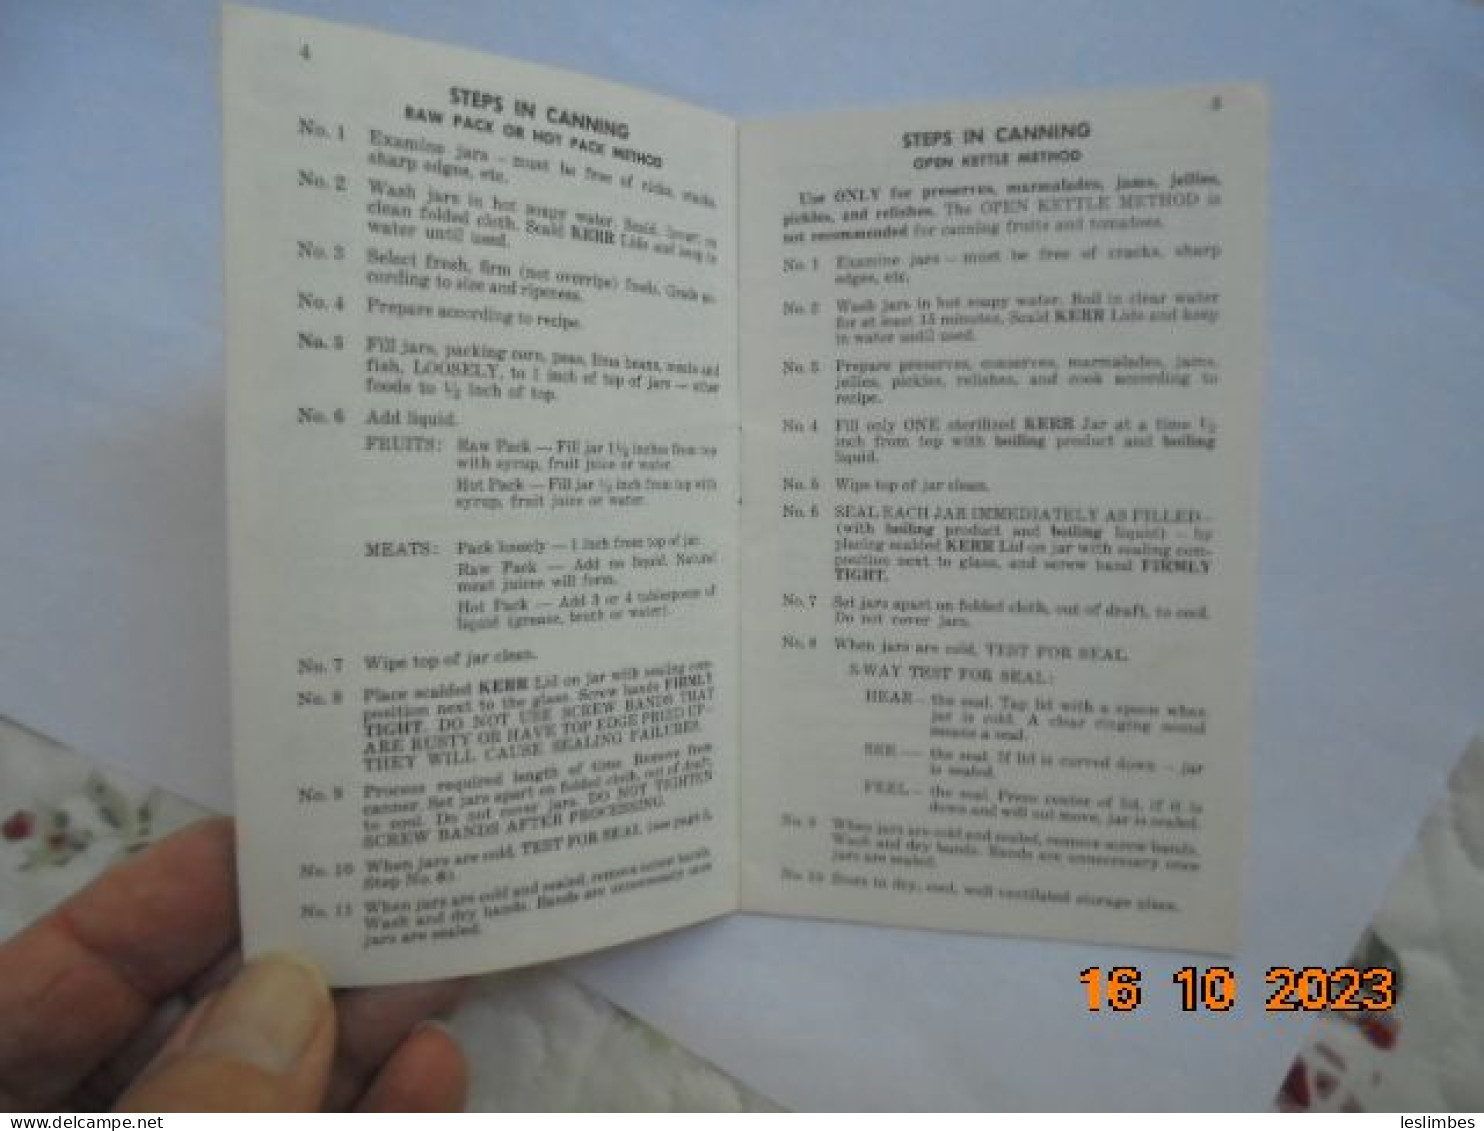 We've Got A Date...Kerr Home Canning And Freezing Guide 1967 - Americana